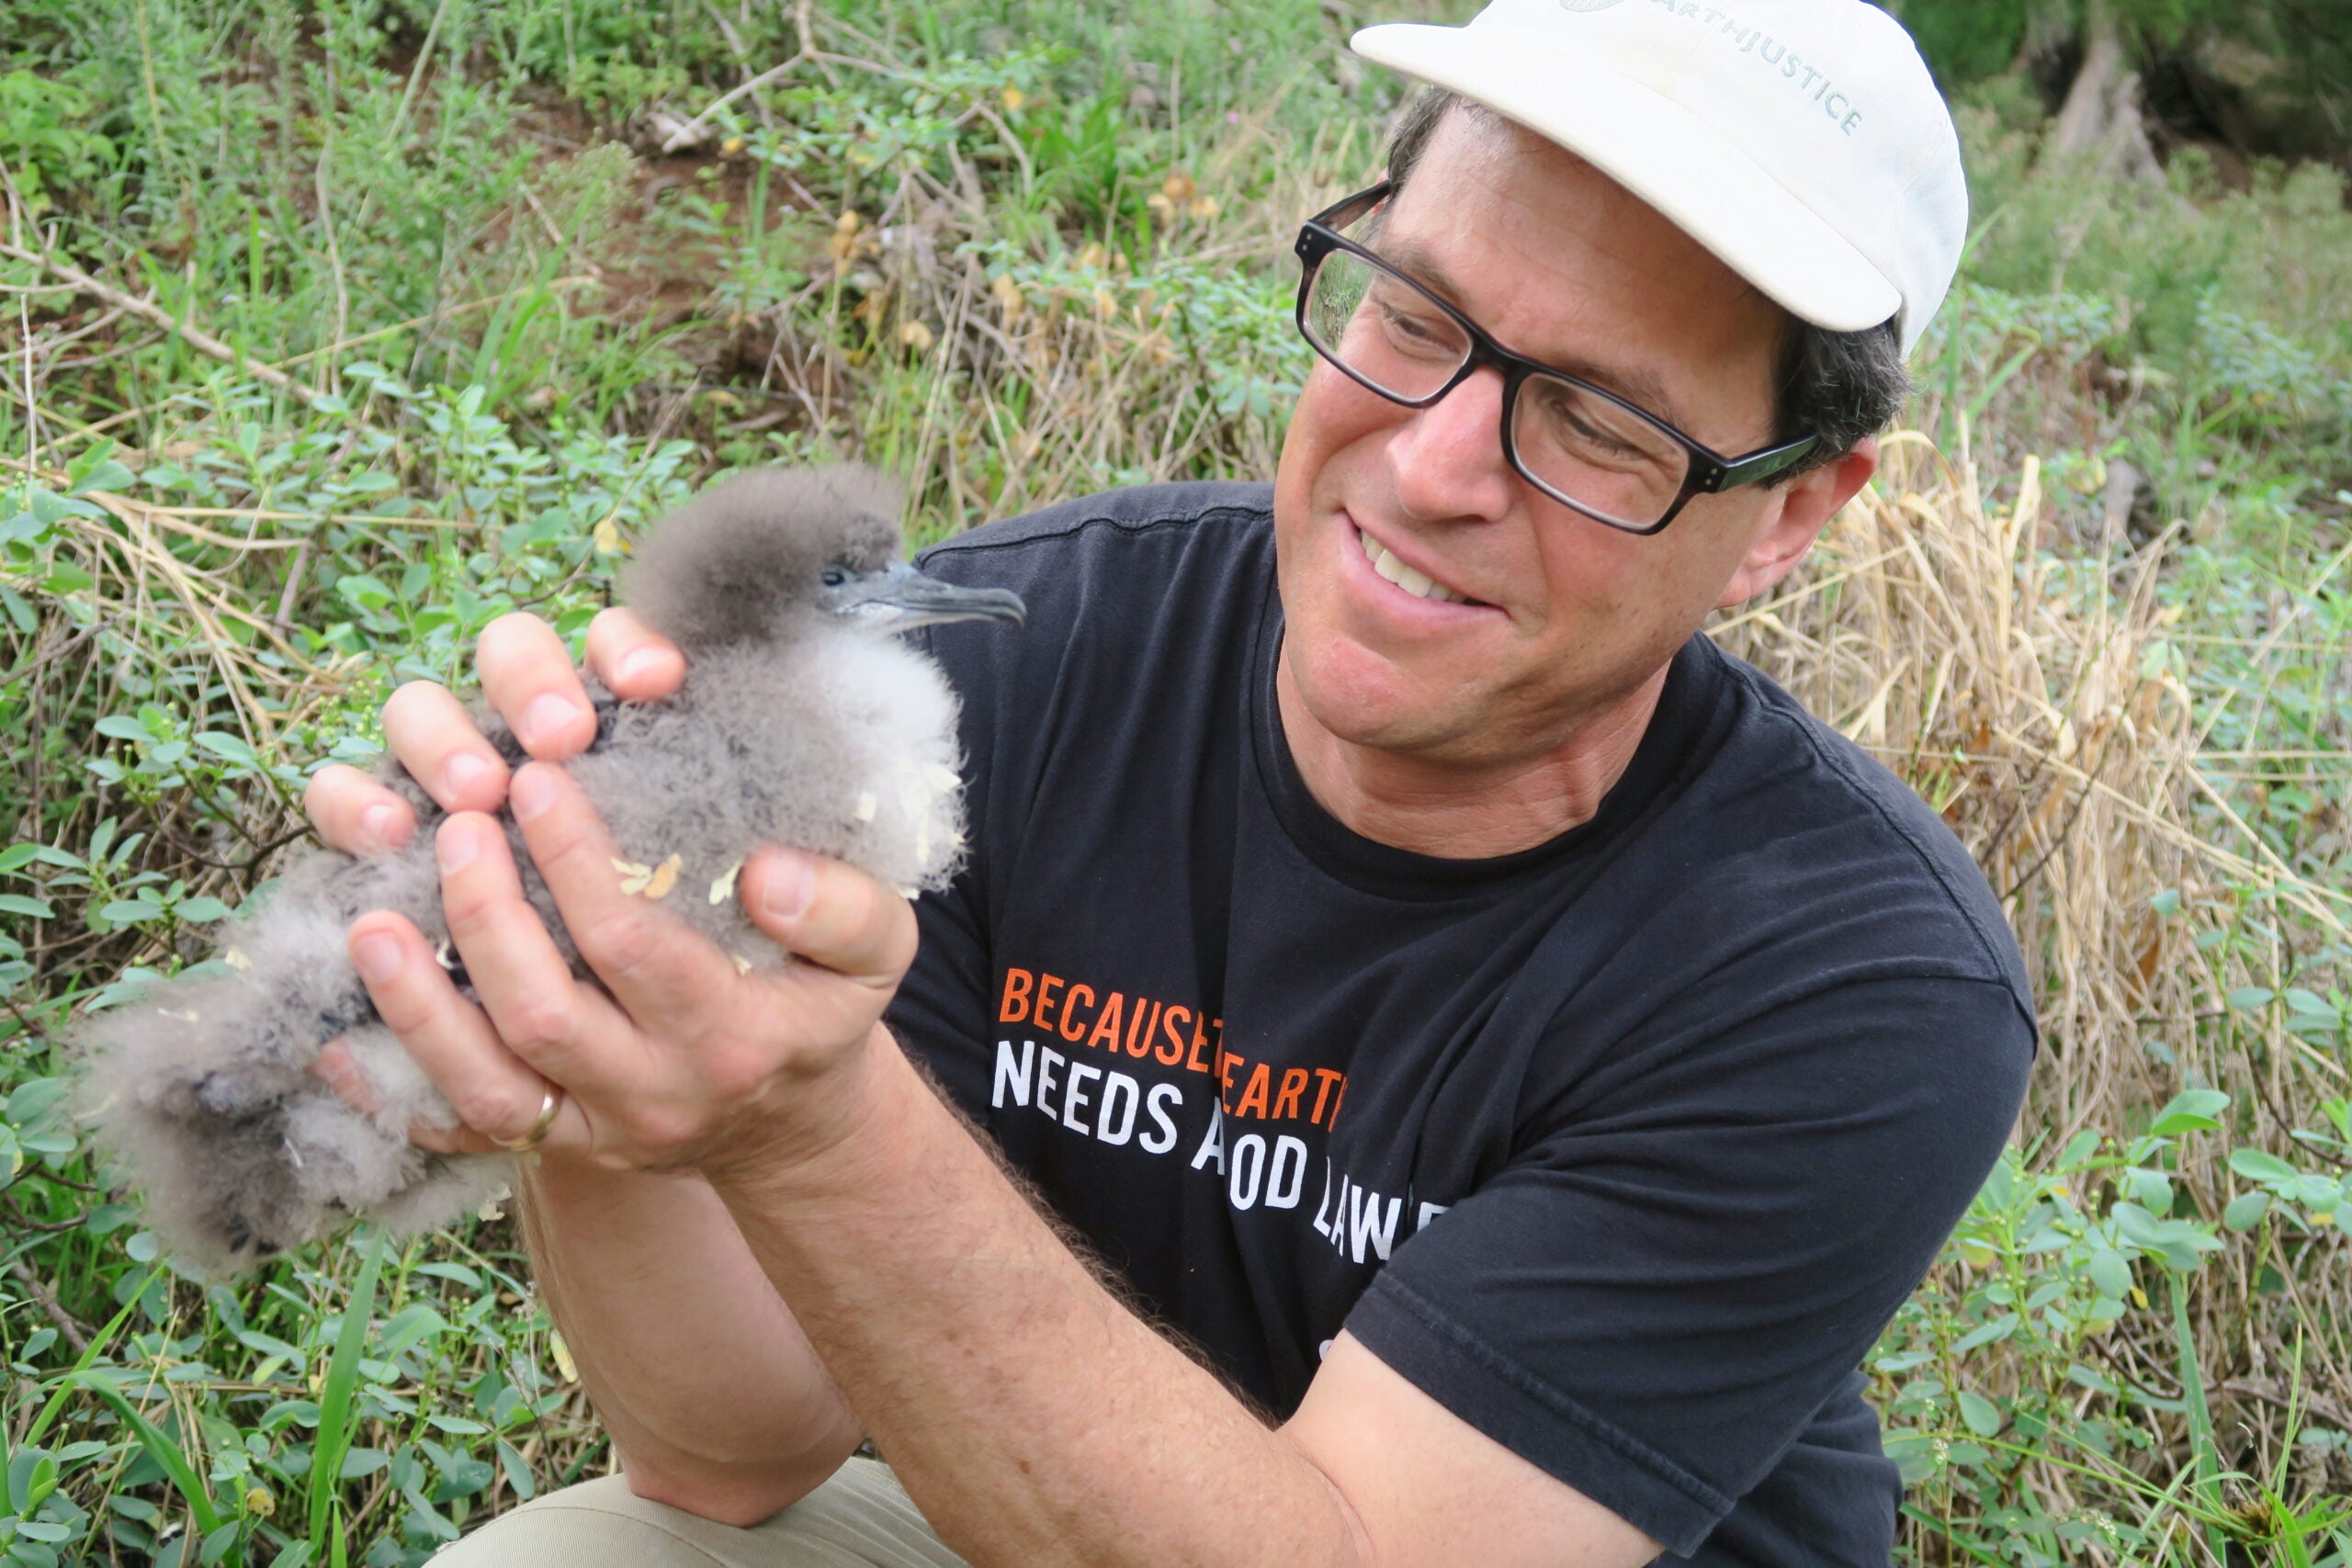 Earthjustice attorney David Henkin holds a Newell’s shearwater chick.
(Earthjustice)